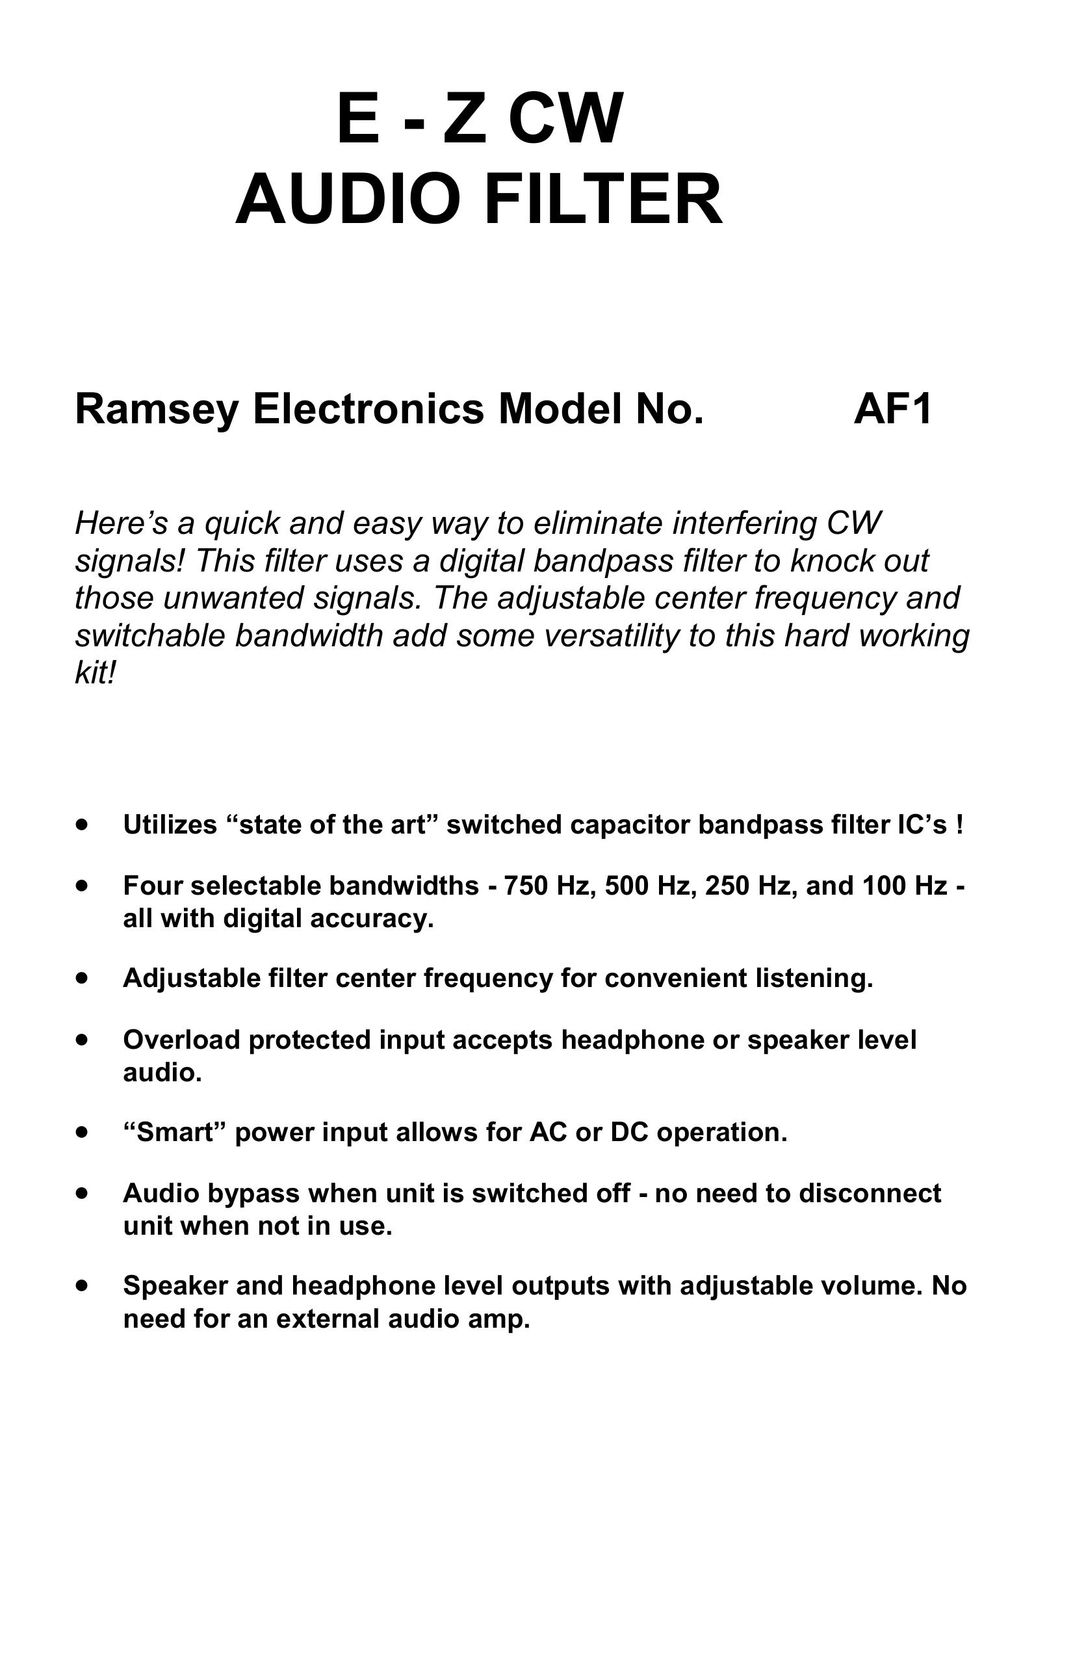 Ramsey Electronics AF1 Car Stereo System User Manual